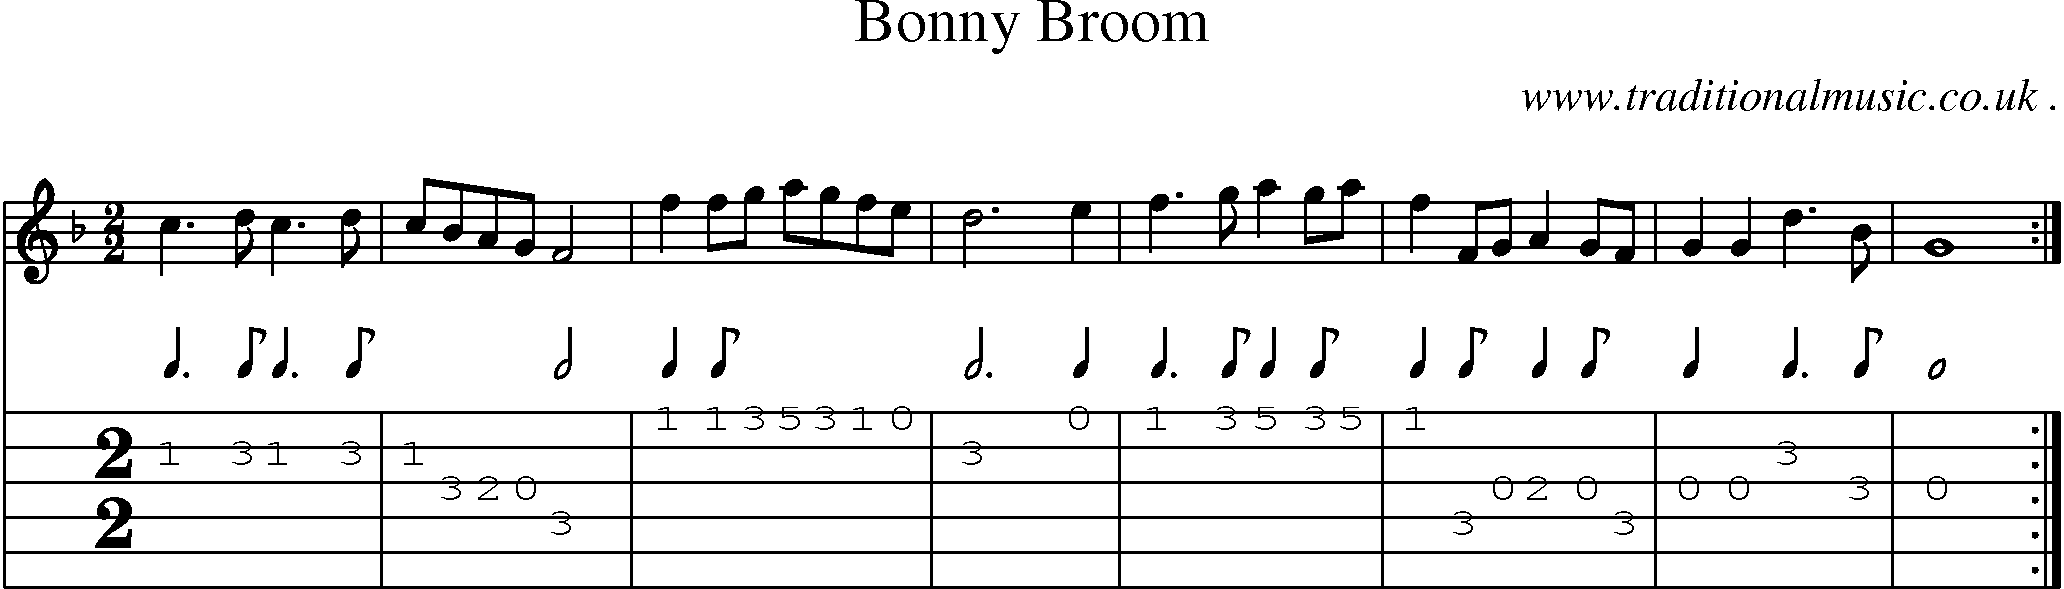 Sheet-Music and Guitar Tabs for Bonny Broom